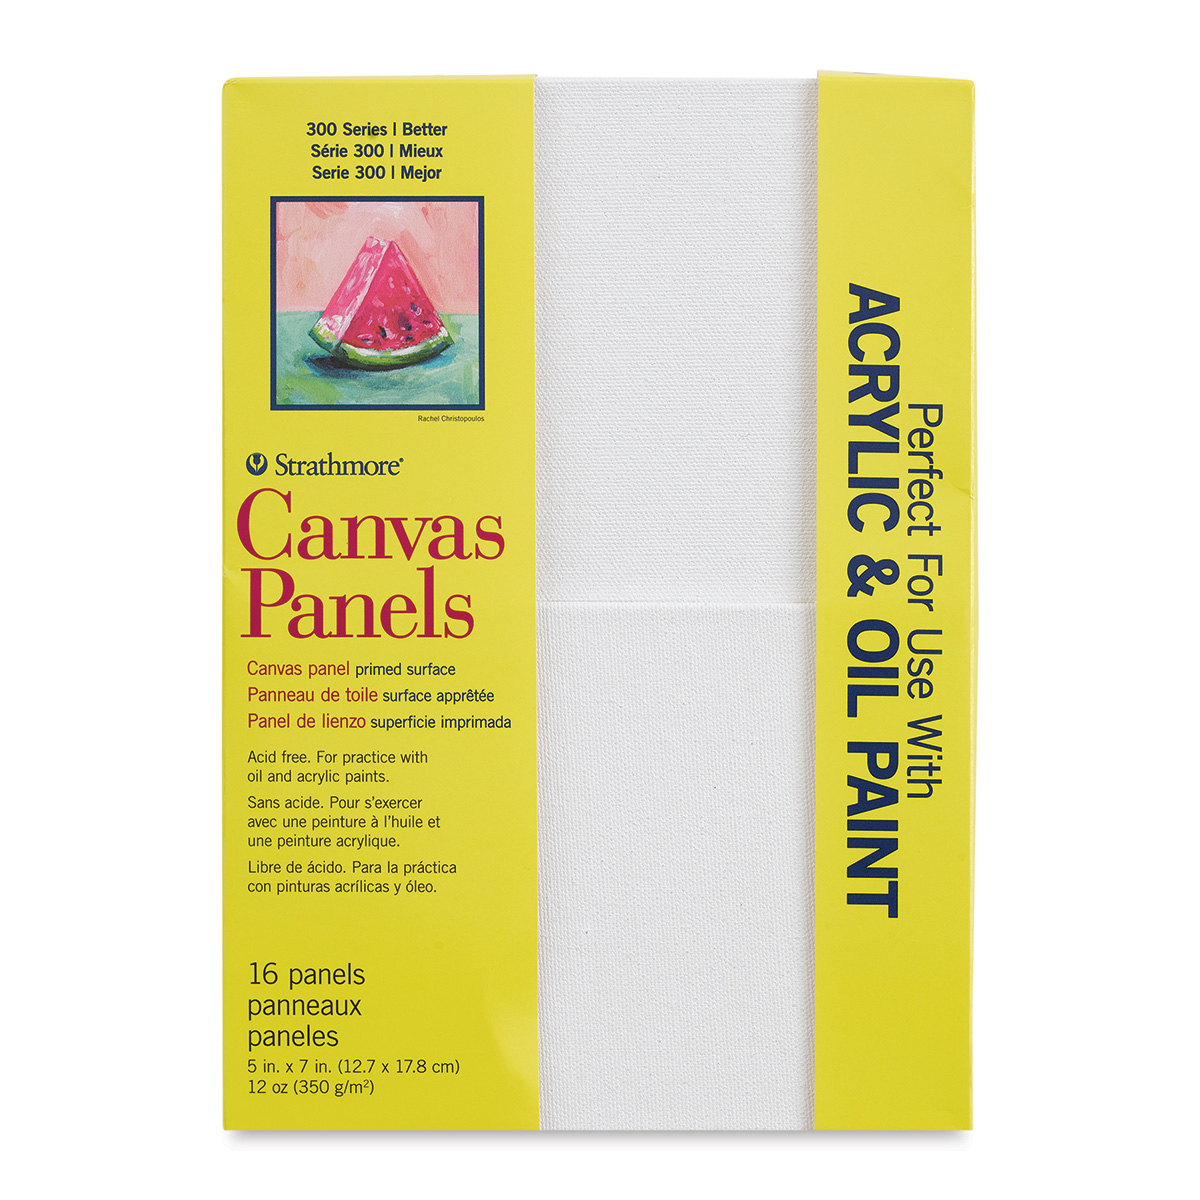 Strathmore 300 Series Canvas Paper Pad, Glue Bound, 12x16 inches, 10 Sheets  (115lb/187g) - Artist Paper for Adults and Students - Acrylic and Oil